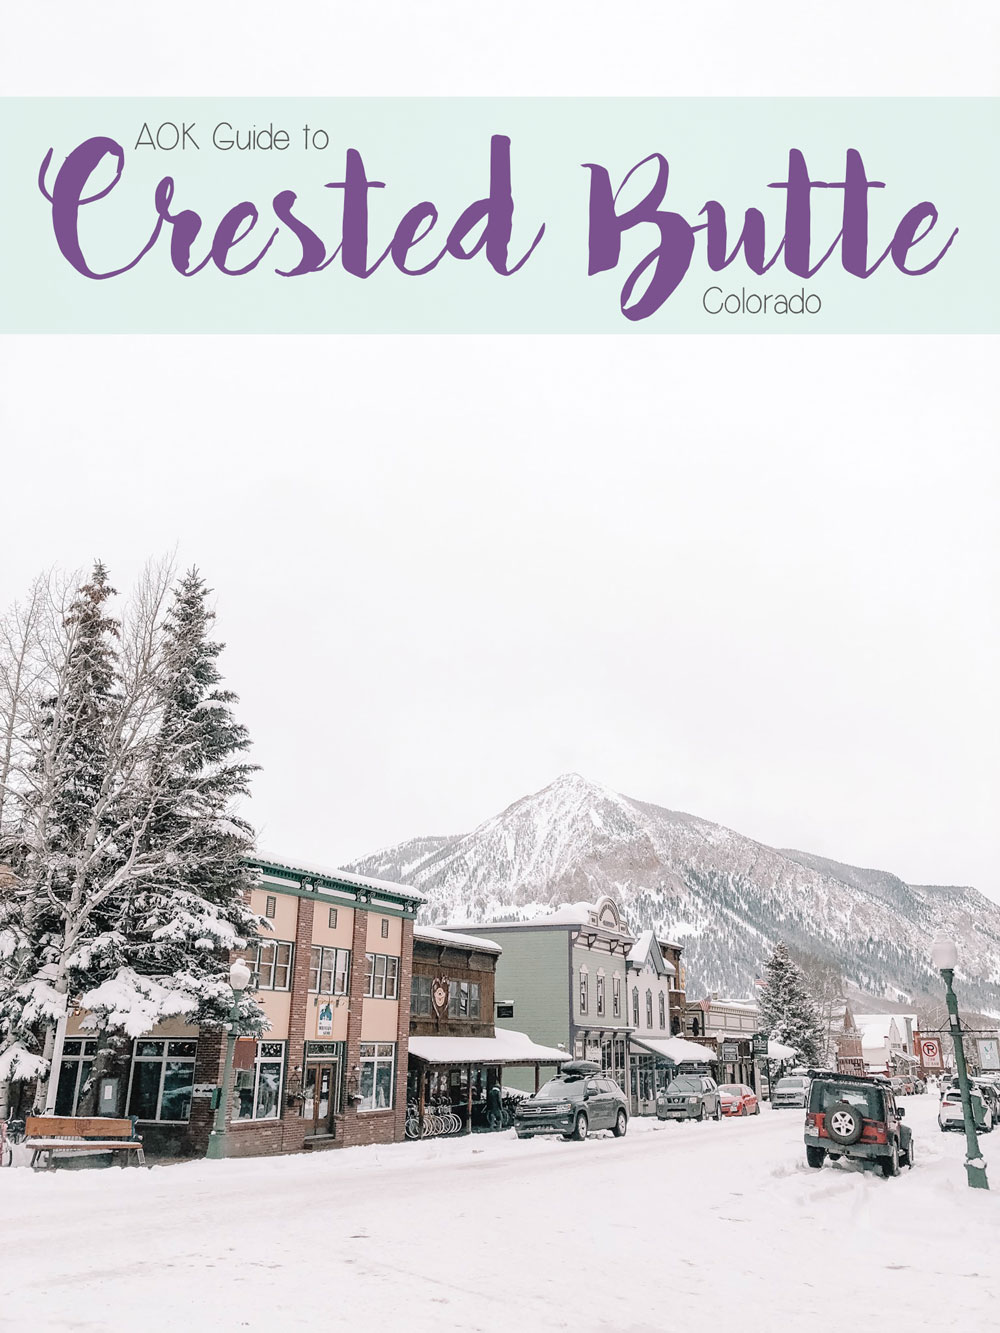 AOK Guide to Crested Butte, Colorado 